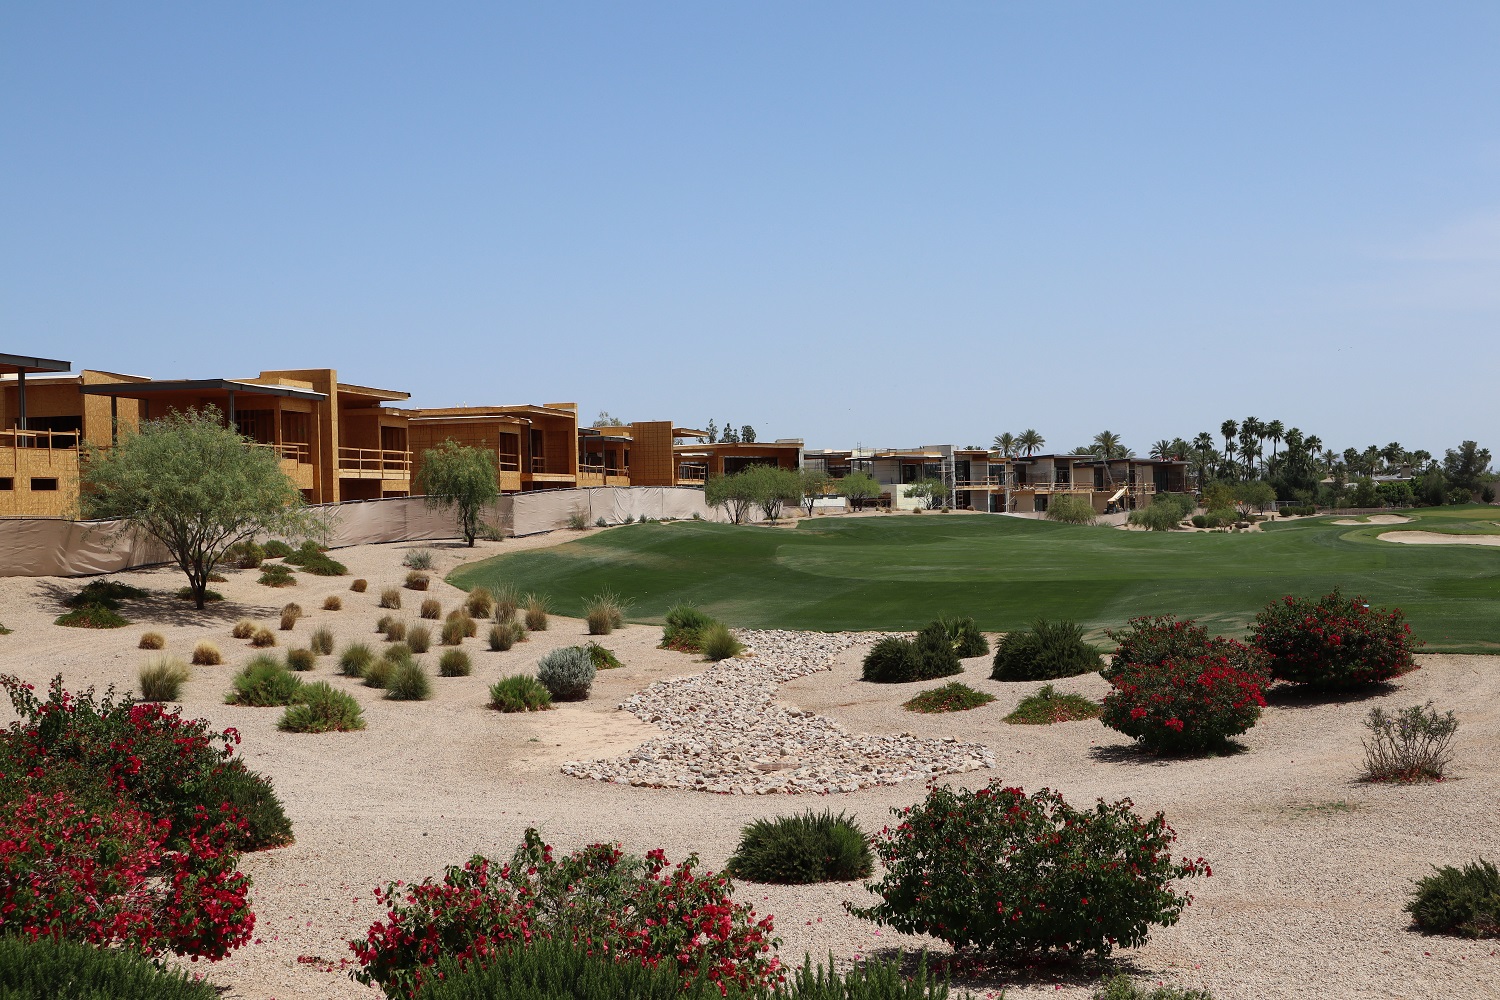 Photo of the golf villas at Ascent.